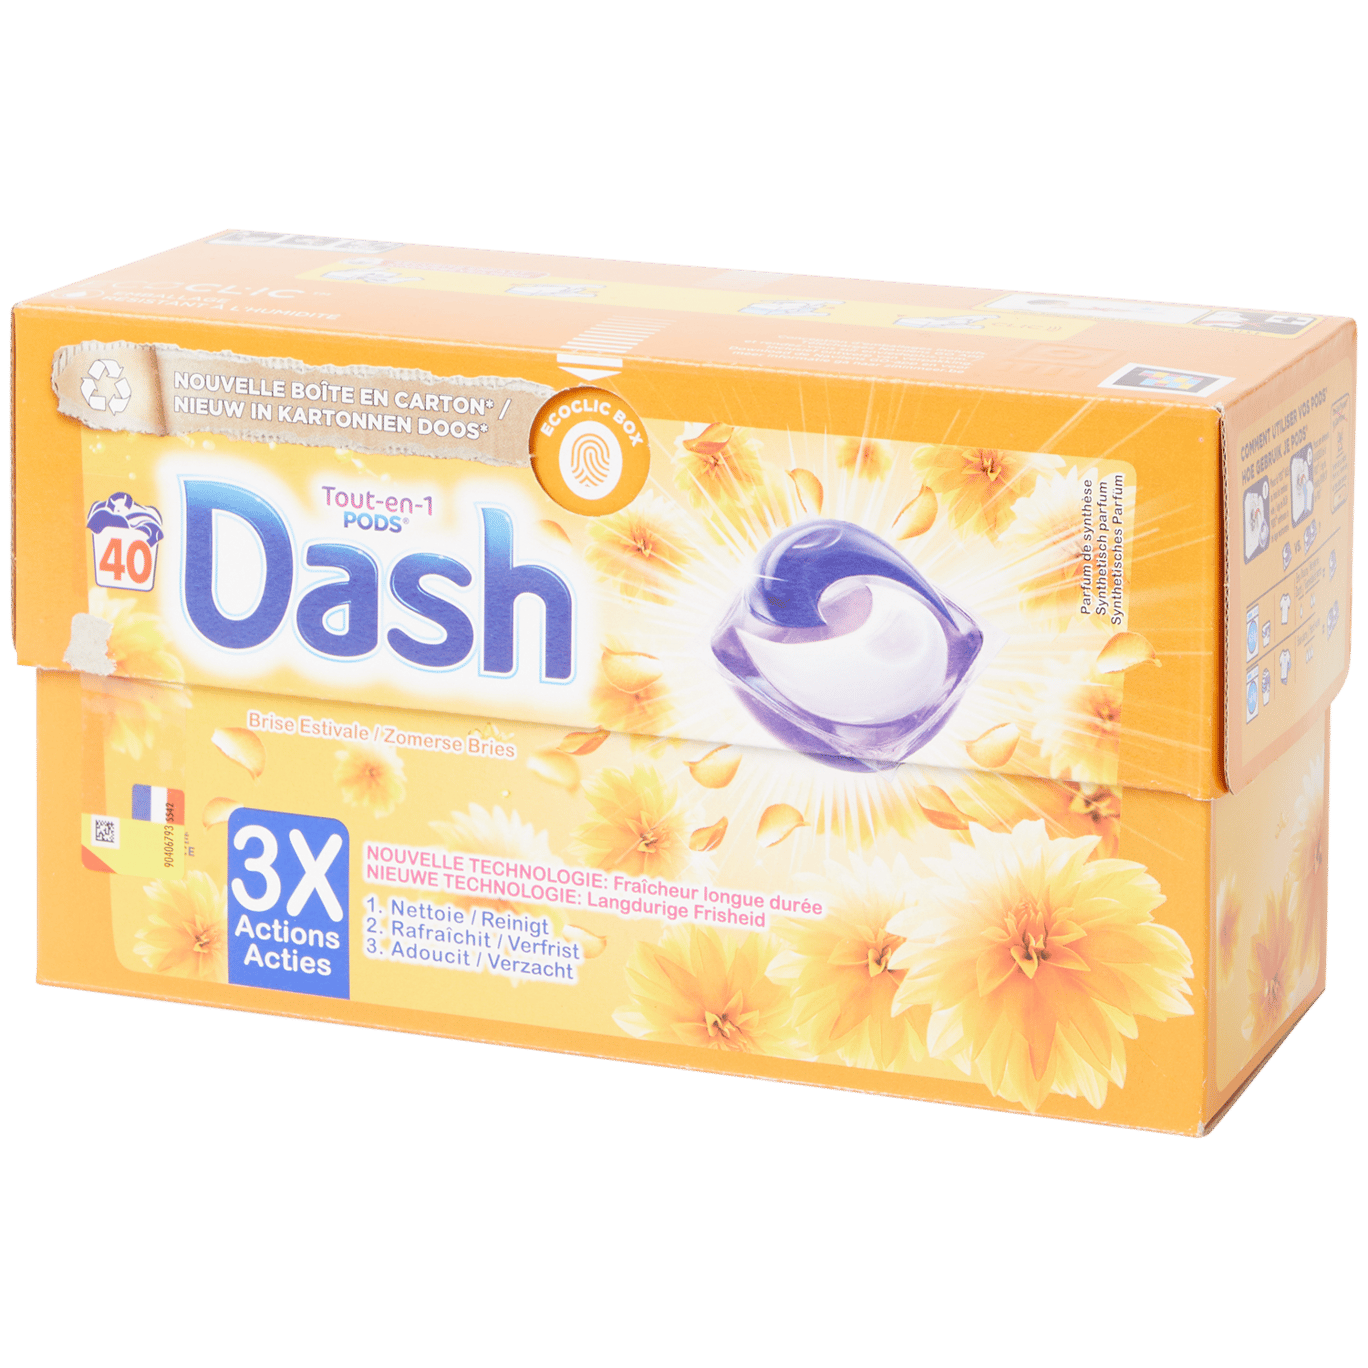 Dash All-in-1 pods Zomerse Bries